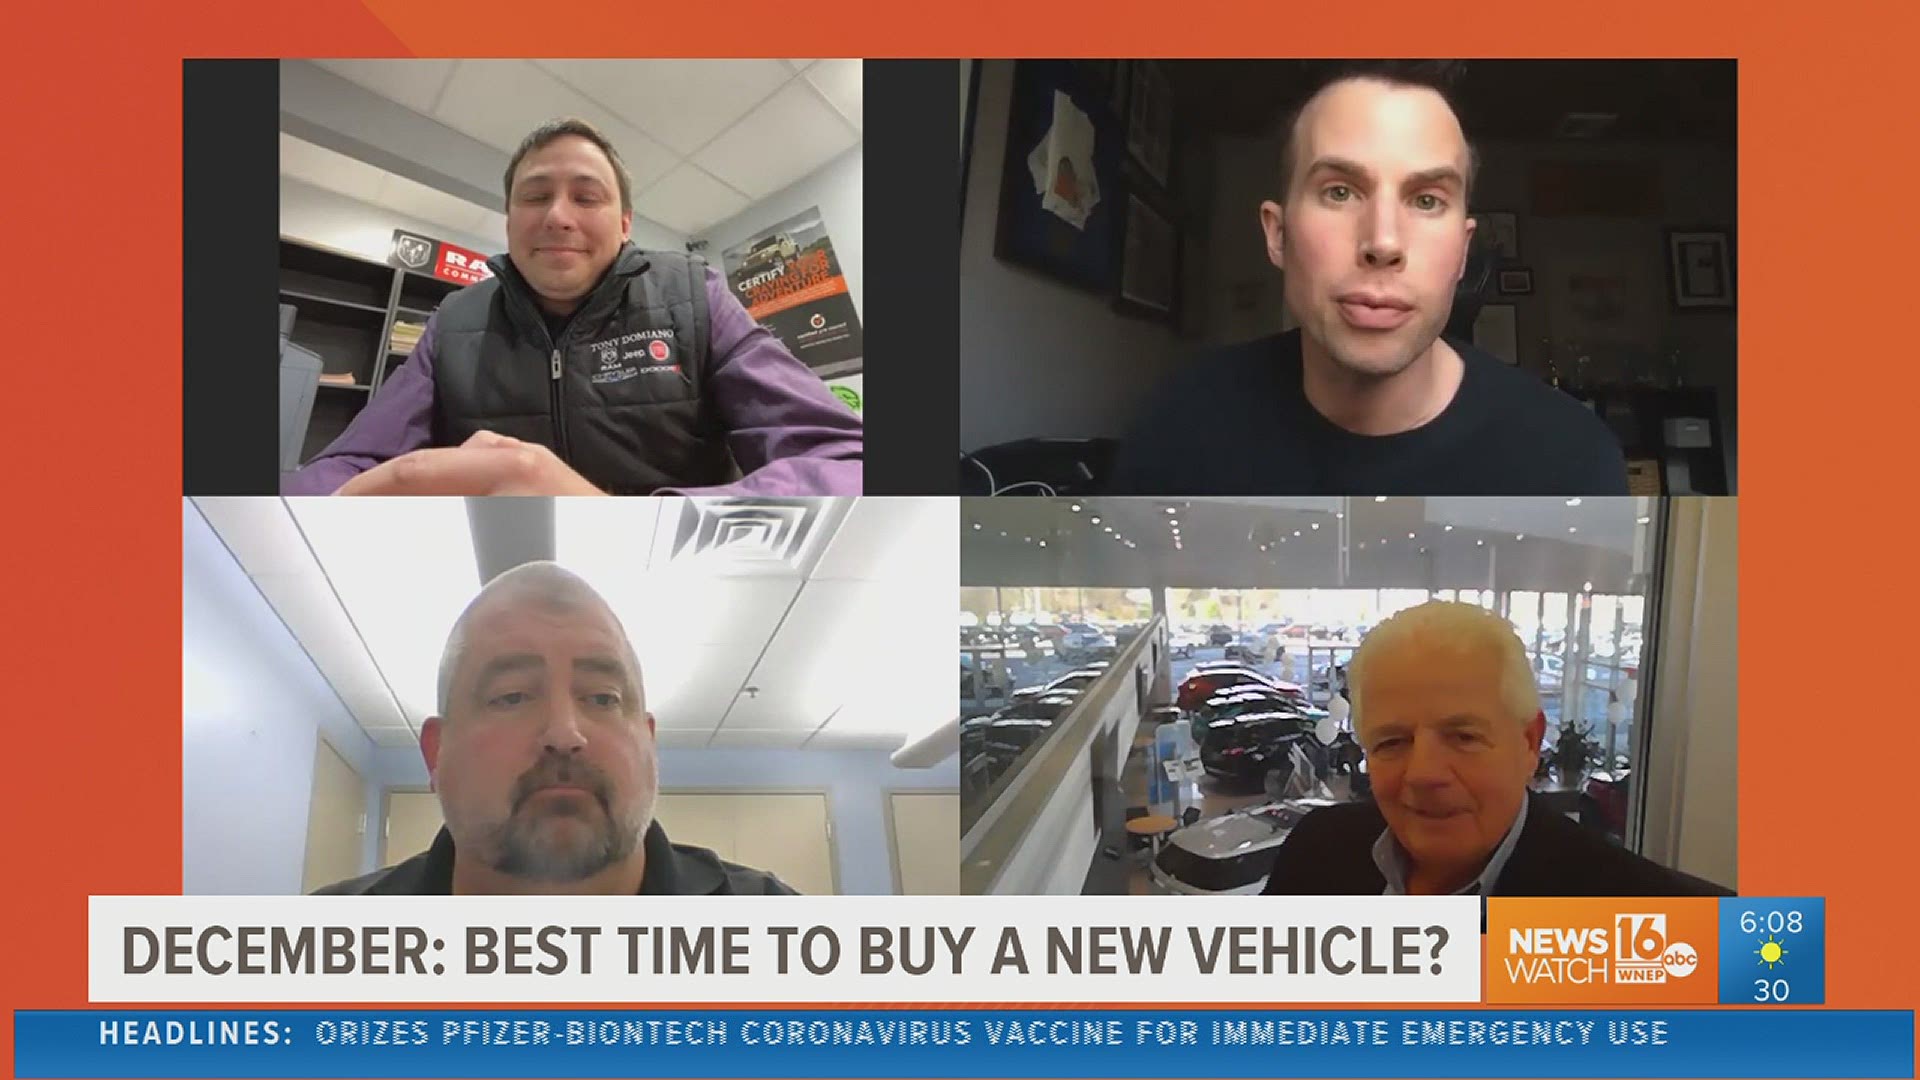 From deep discounts on new cars, to more money for your trade in, watch to see why December is a prime time to get a new ride.